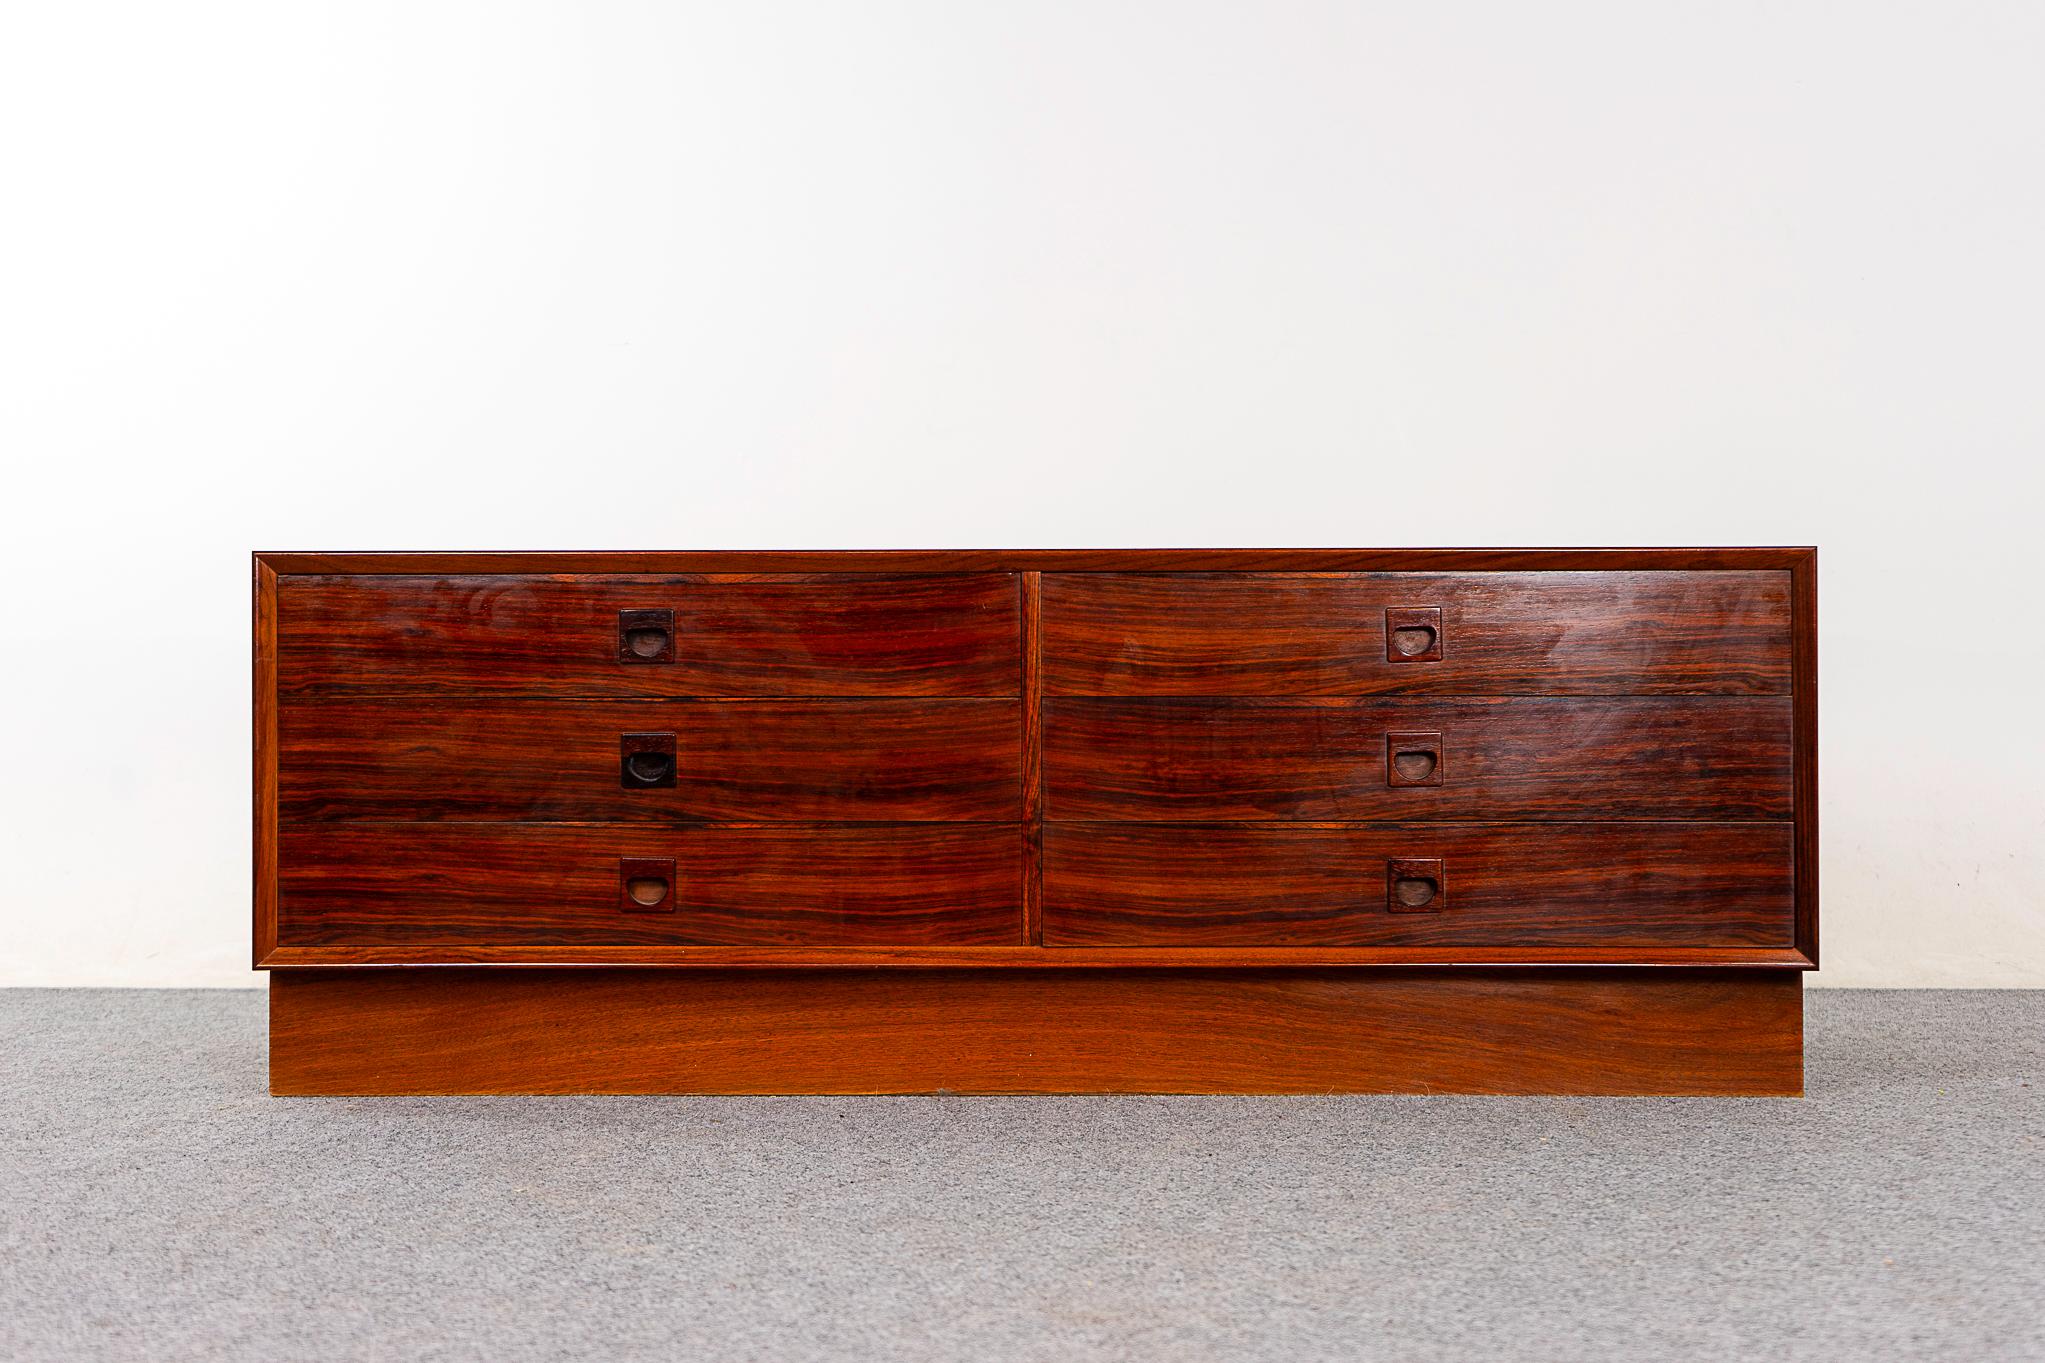 Rosewood mid-century dresser, circa 1960's. Great grain patterns, solid wood edging and book-matched veneer flat surfaces. Sleek handles and robust construction. Long, low proportions allow you to hang a flat screen TV above!

Unrestored item with